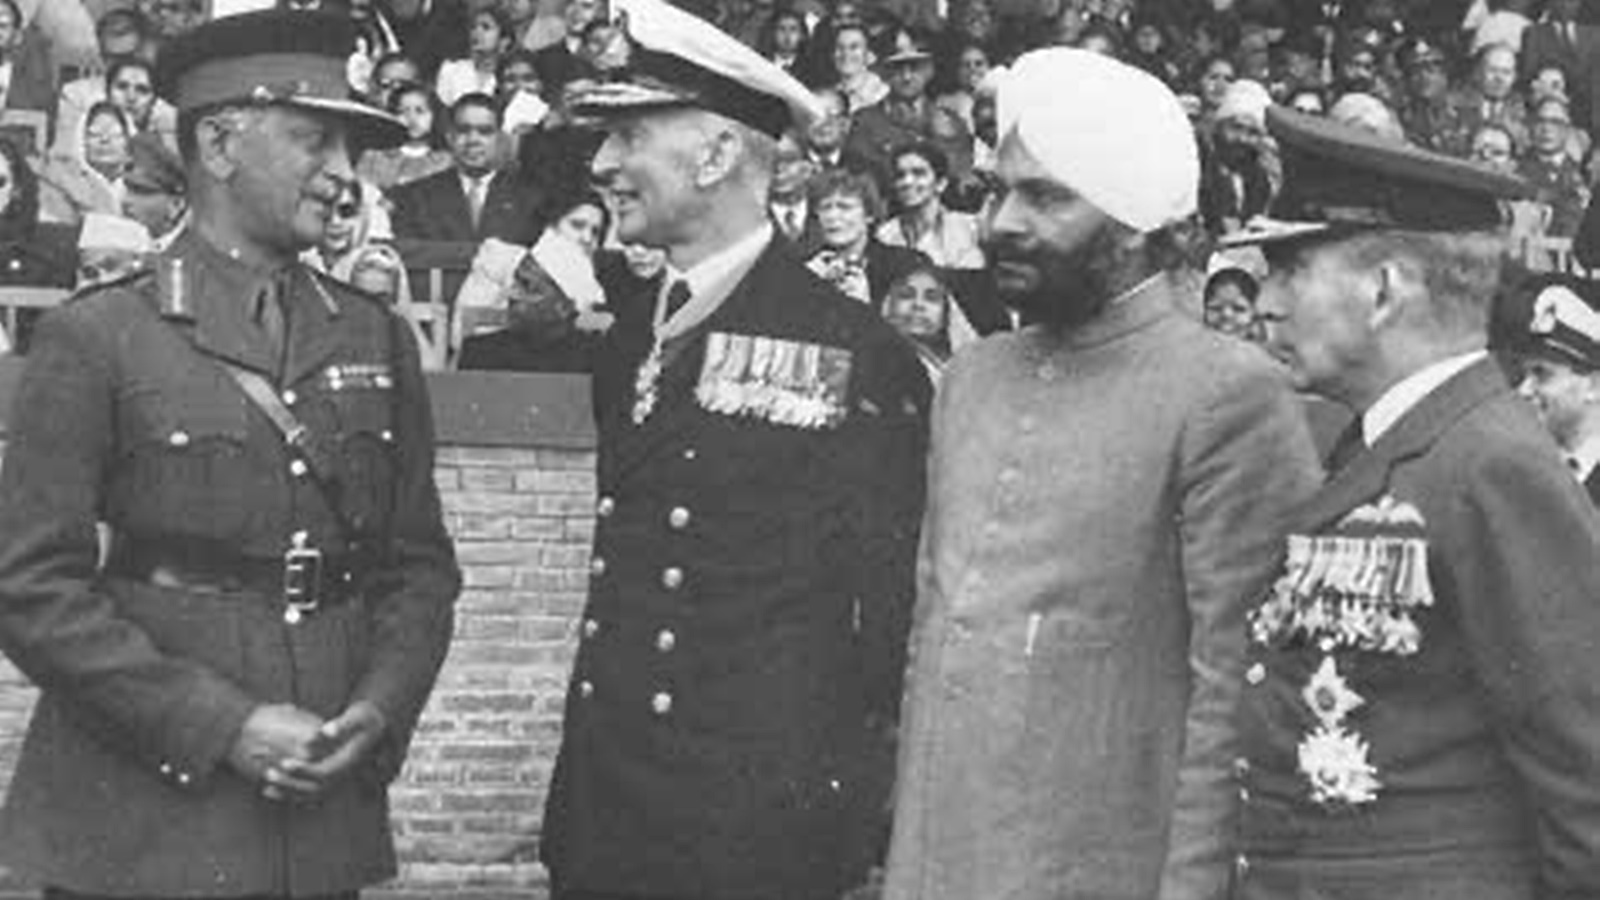 Recalling the marching contingents of first Republic Day Parade